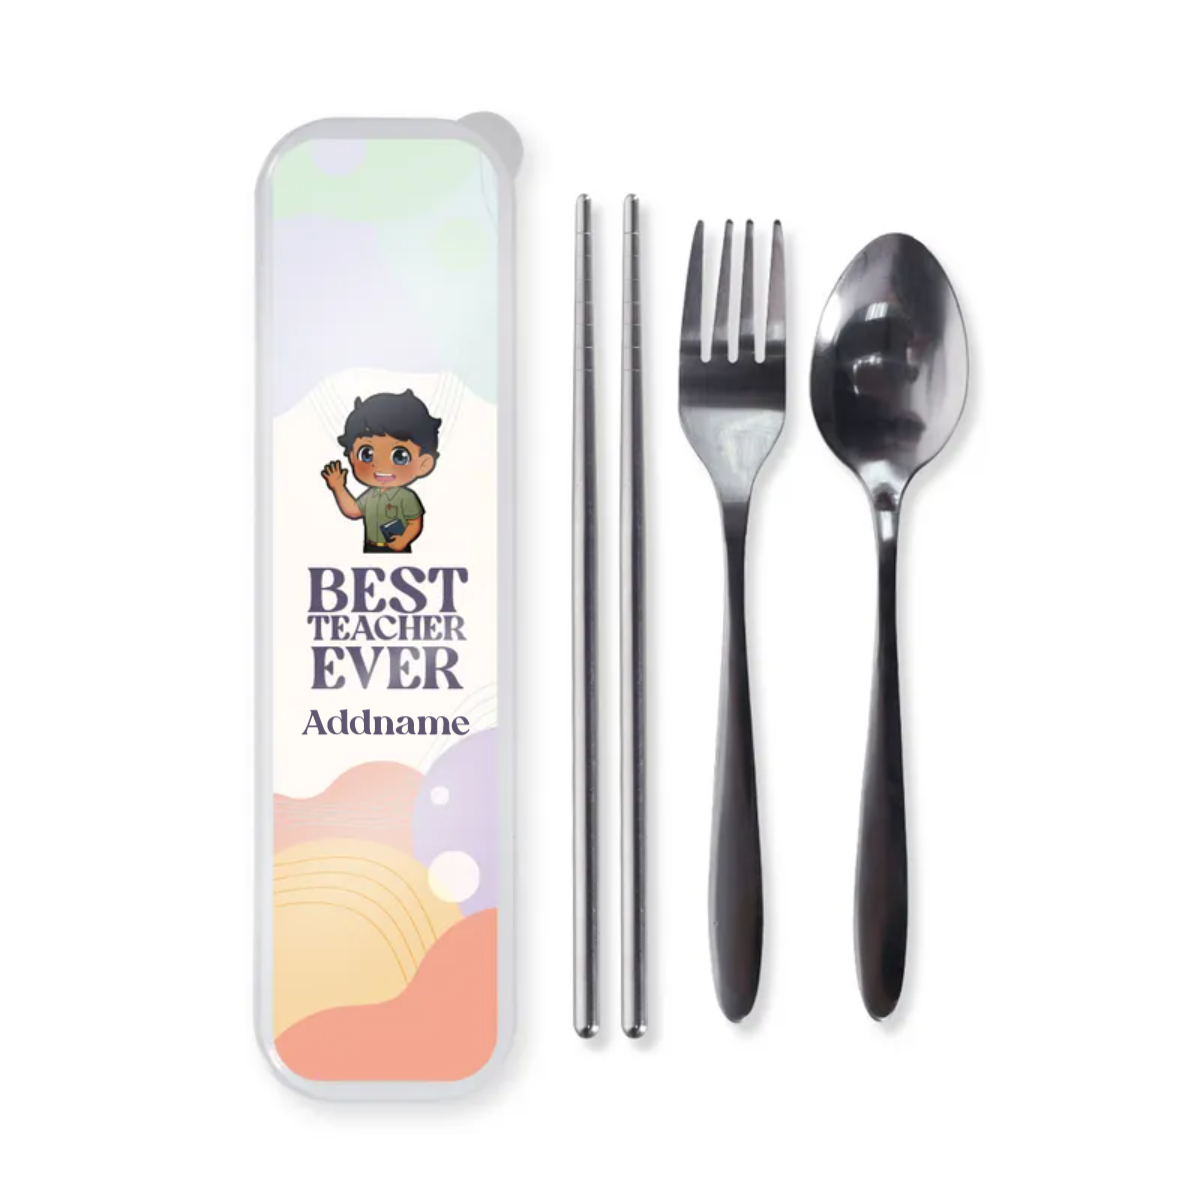 Bringing lunch is more fun when your - Miniso Bangladesh